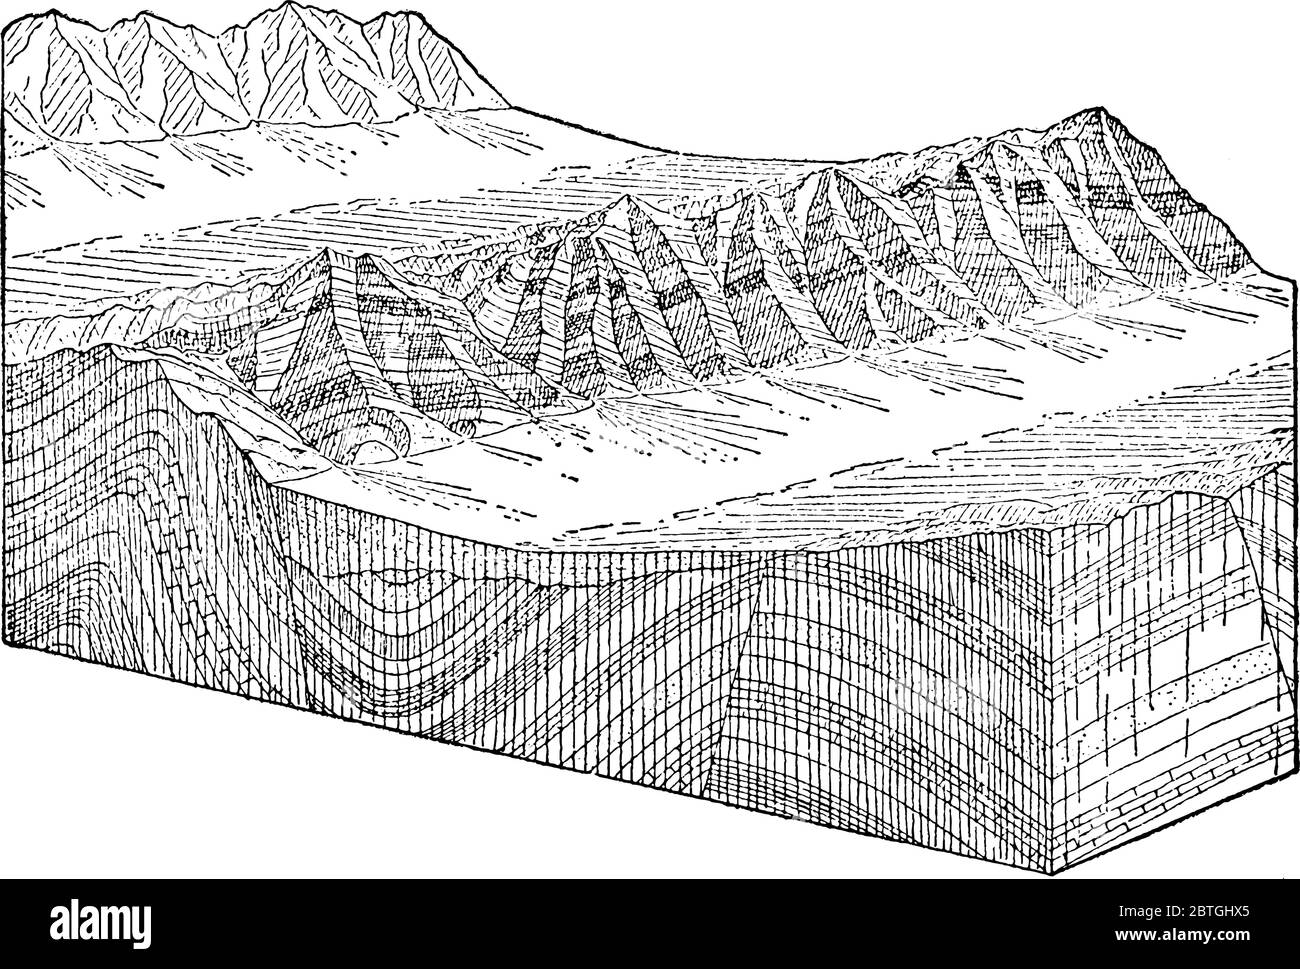 Fault block mountain Black and White Stock Photos & Images - Alamy